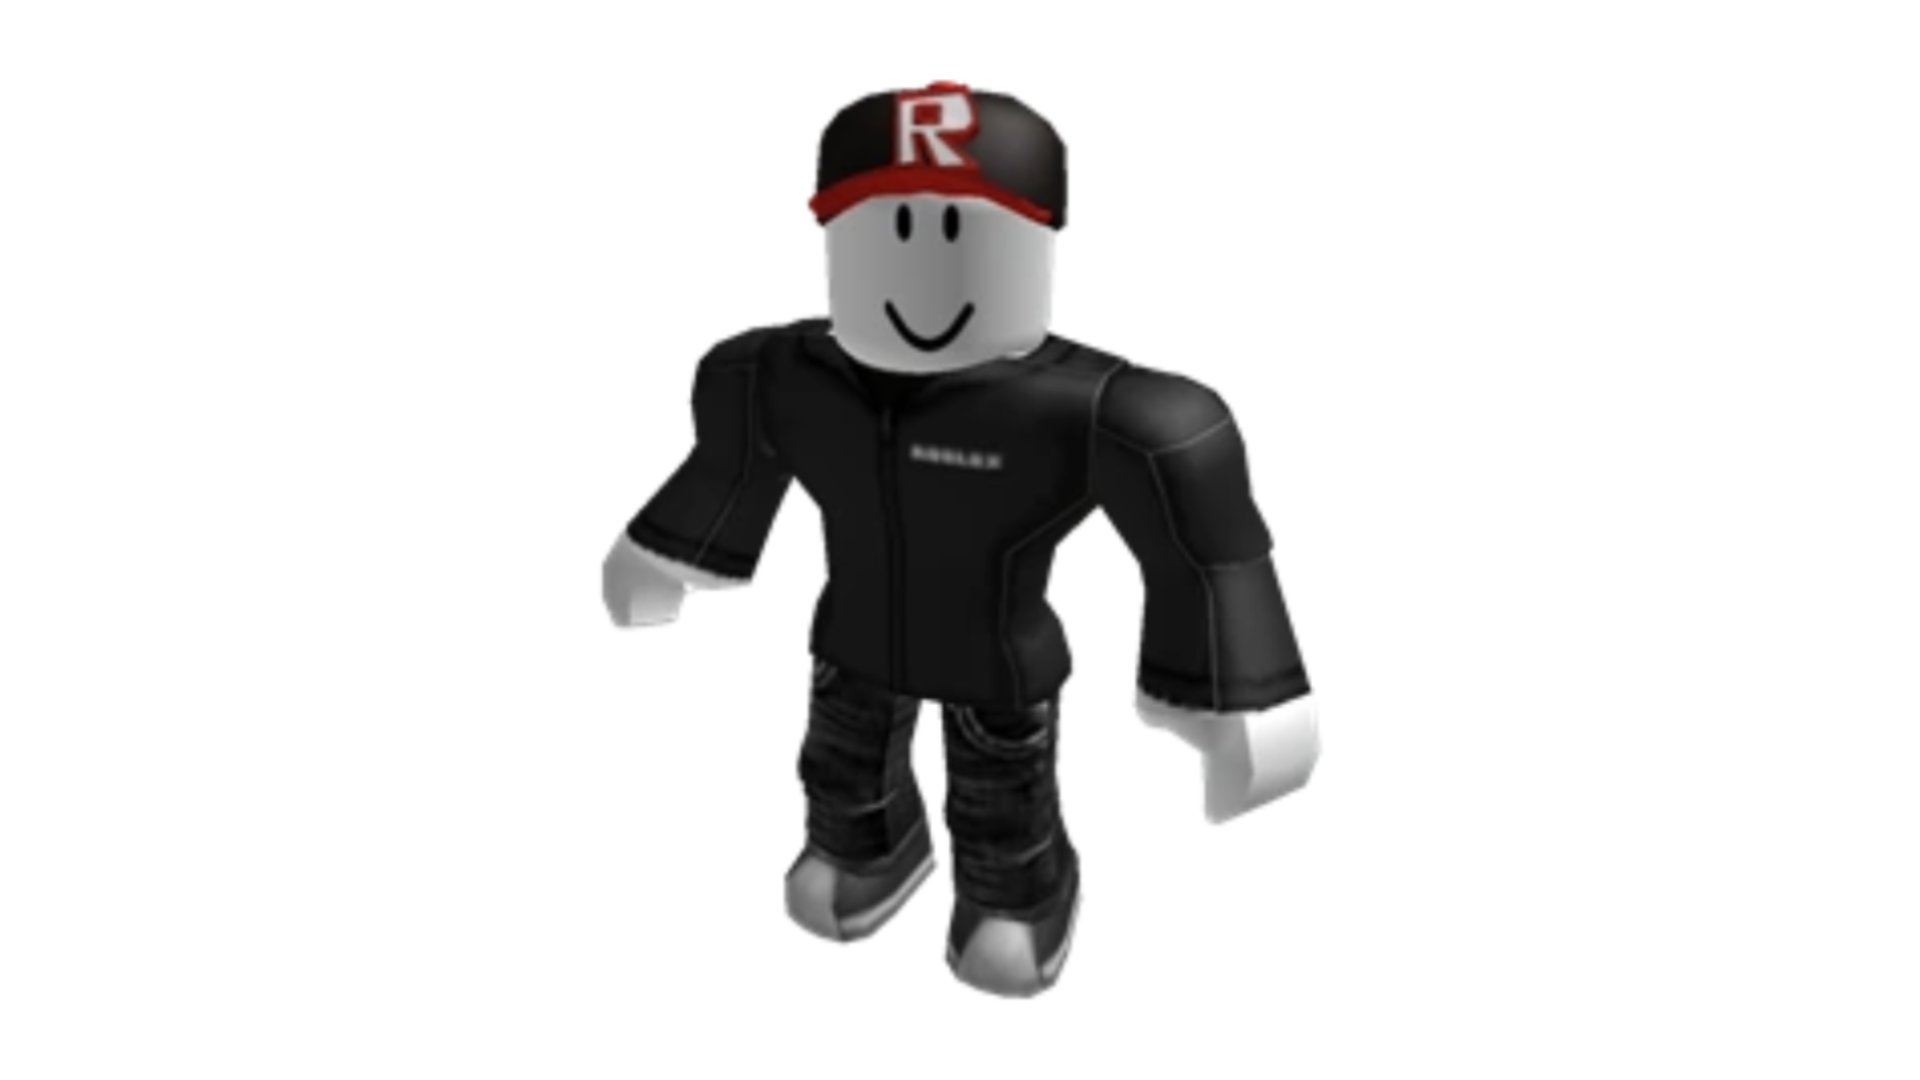 Petition · Bring Roblox guests back! ·